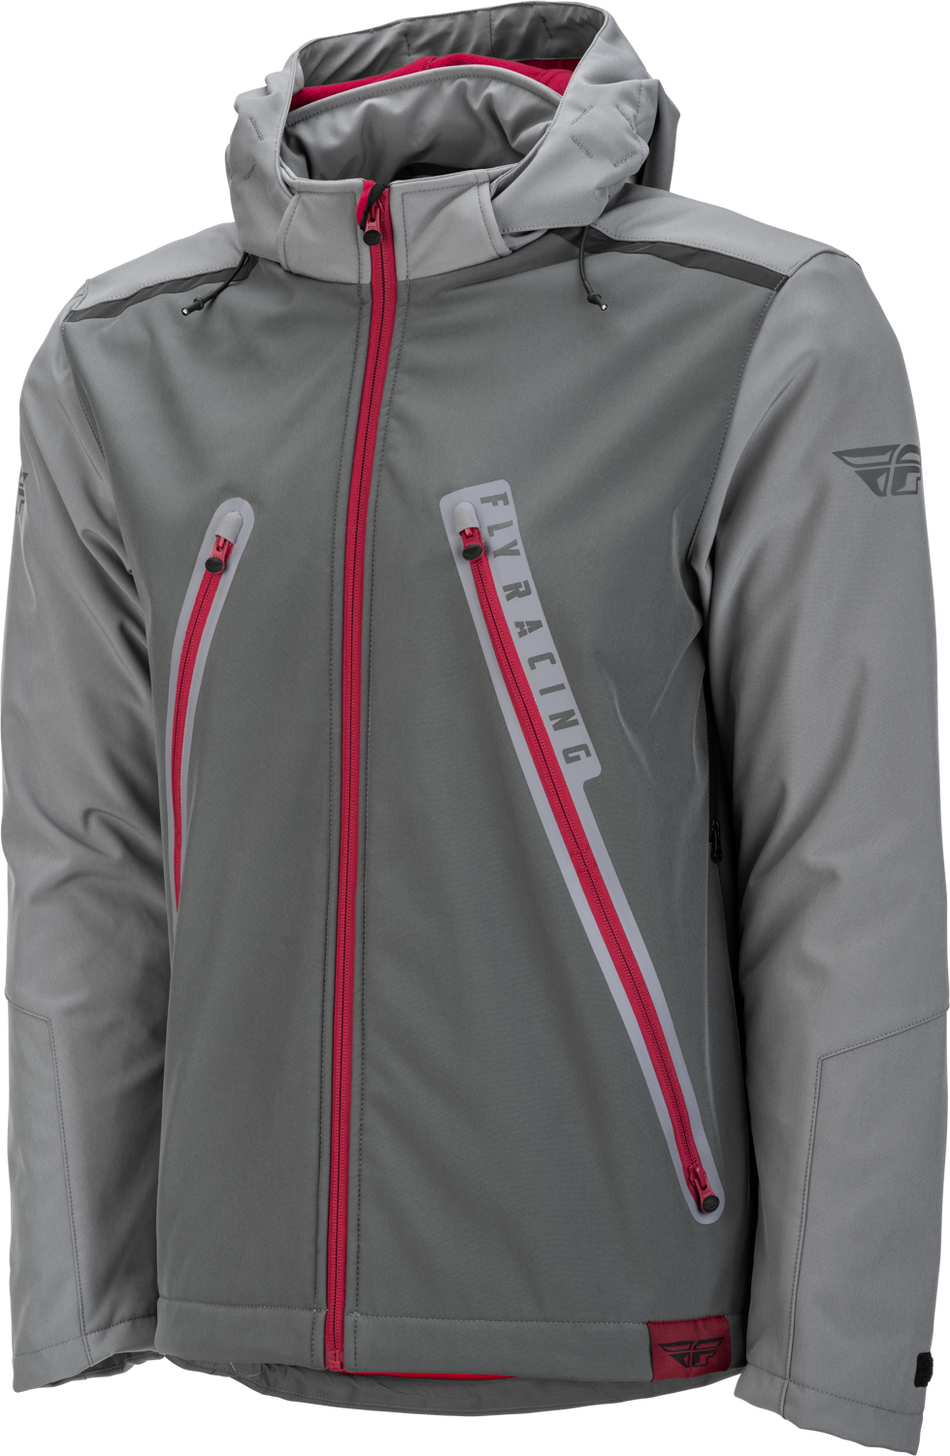 FLY RACING Carbyne Jacket Grey/Red Md 477-4091M